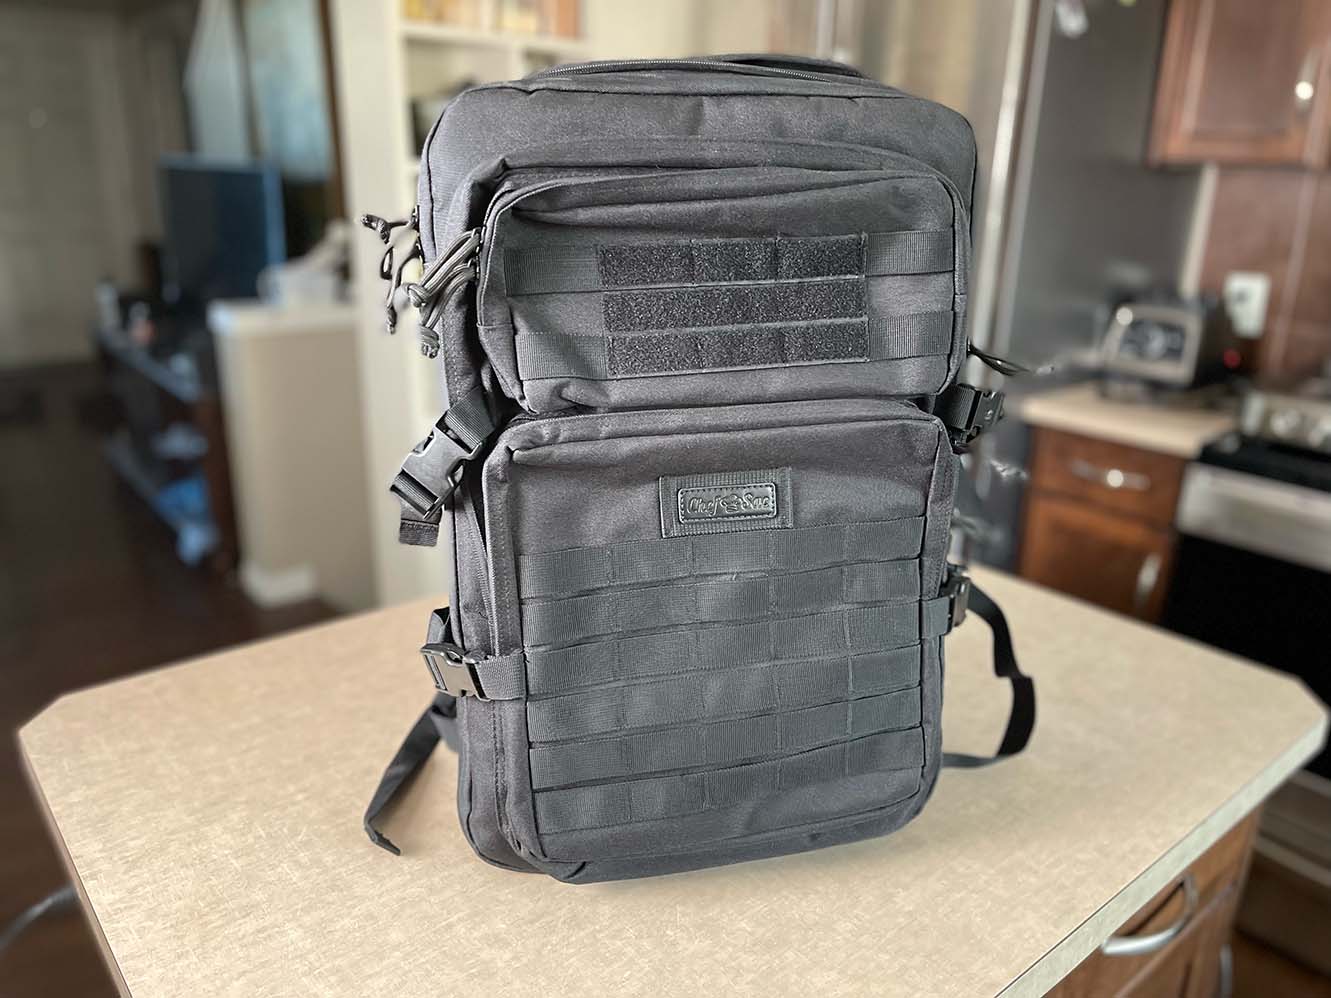 https://www.sizzleandsear.com/wp-content/uploads/2022/03/chef-sac-review-knife-backpack-featured-image.jpg